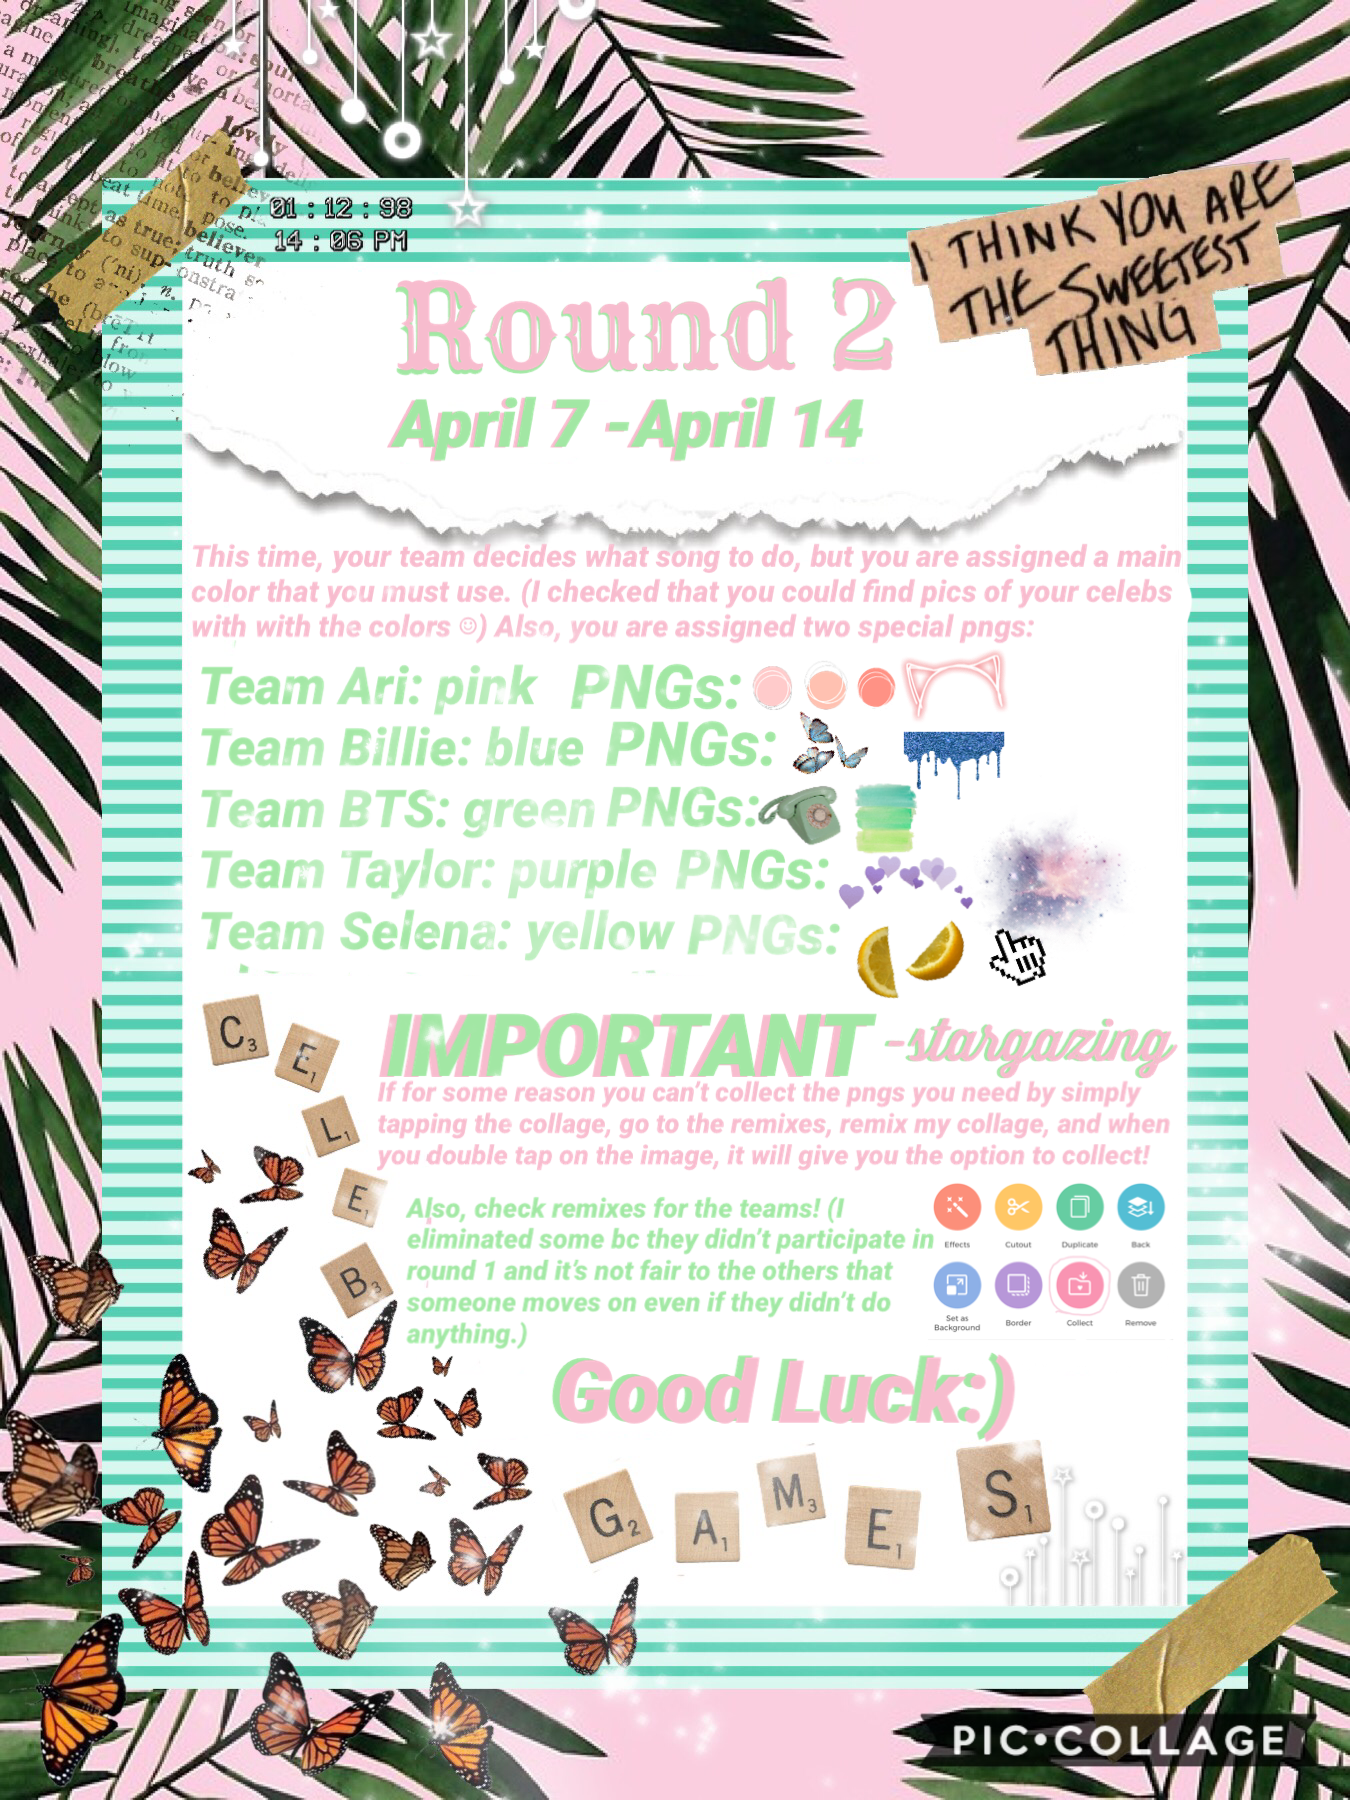 TAP
Round 2 is out! Tell
 your teammates! Plz
check remixes for the 
new teams! Chatpages
will be out in a while!
